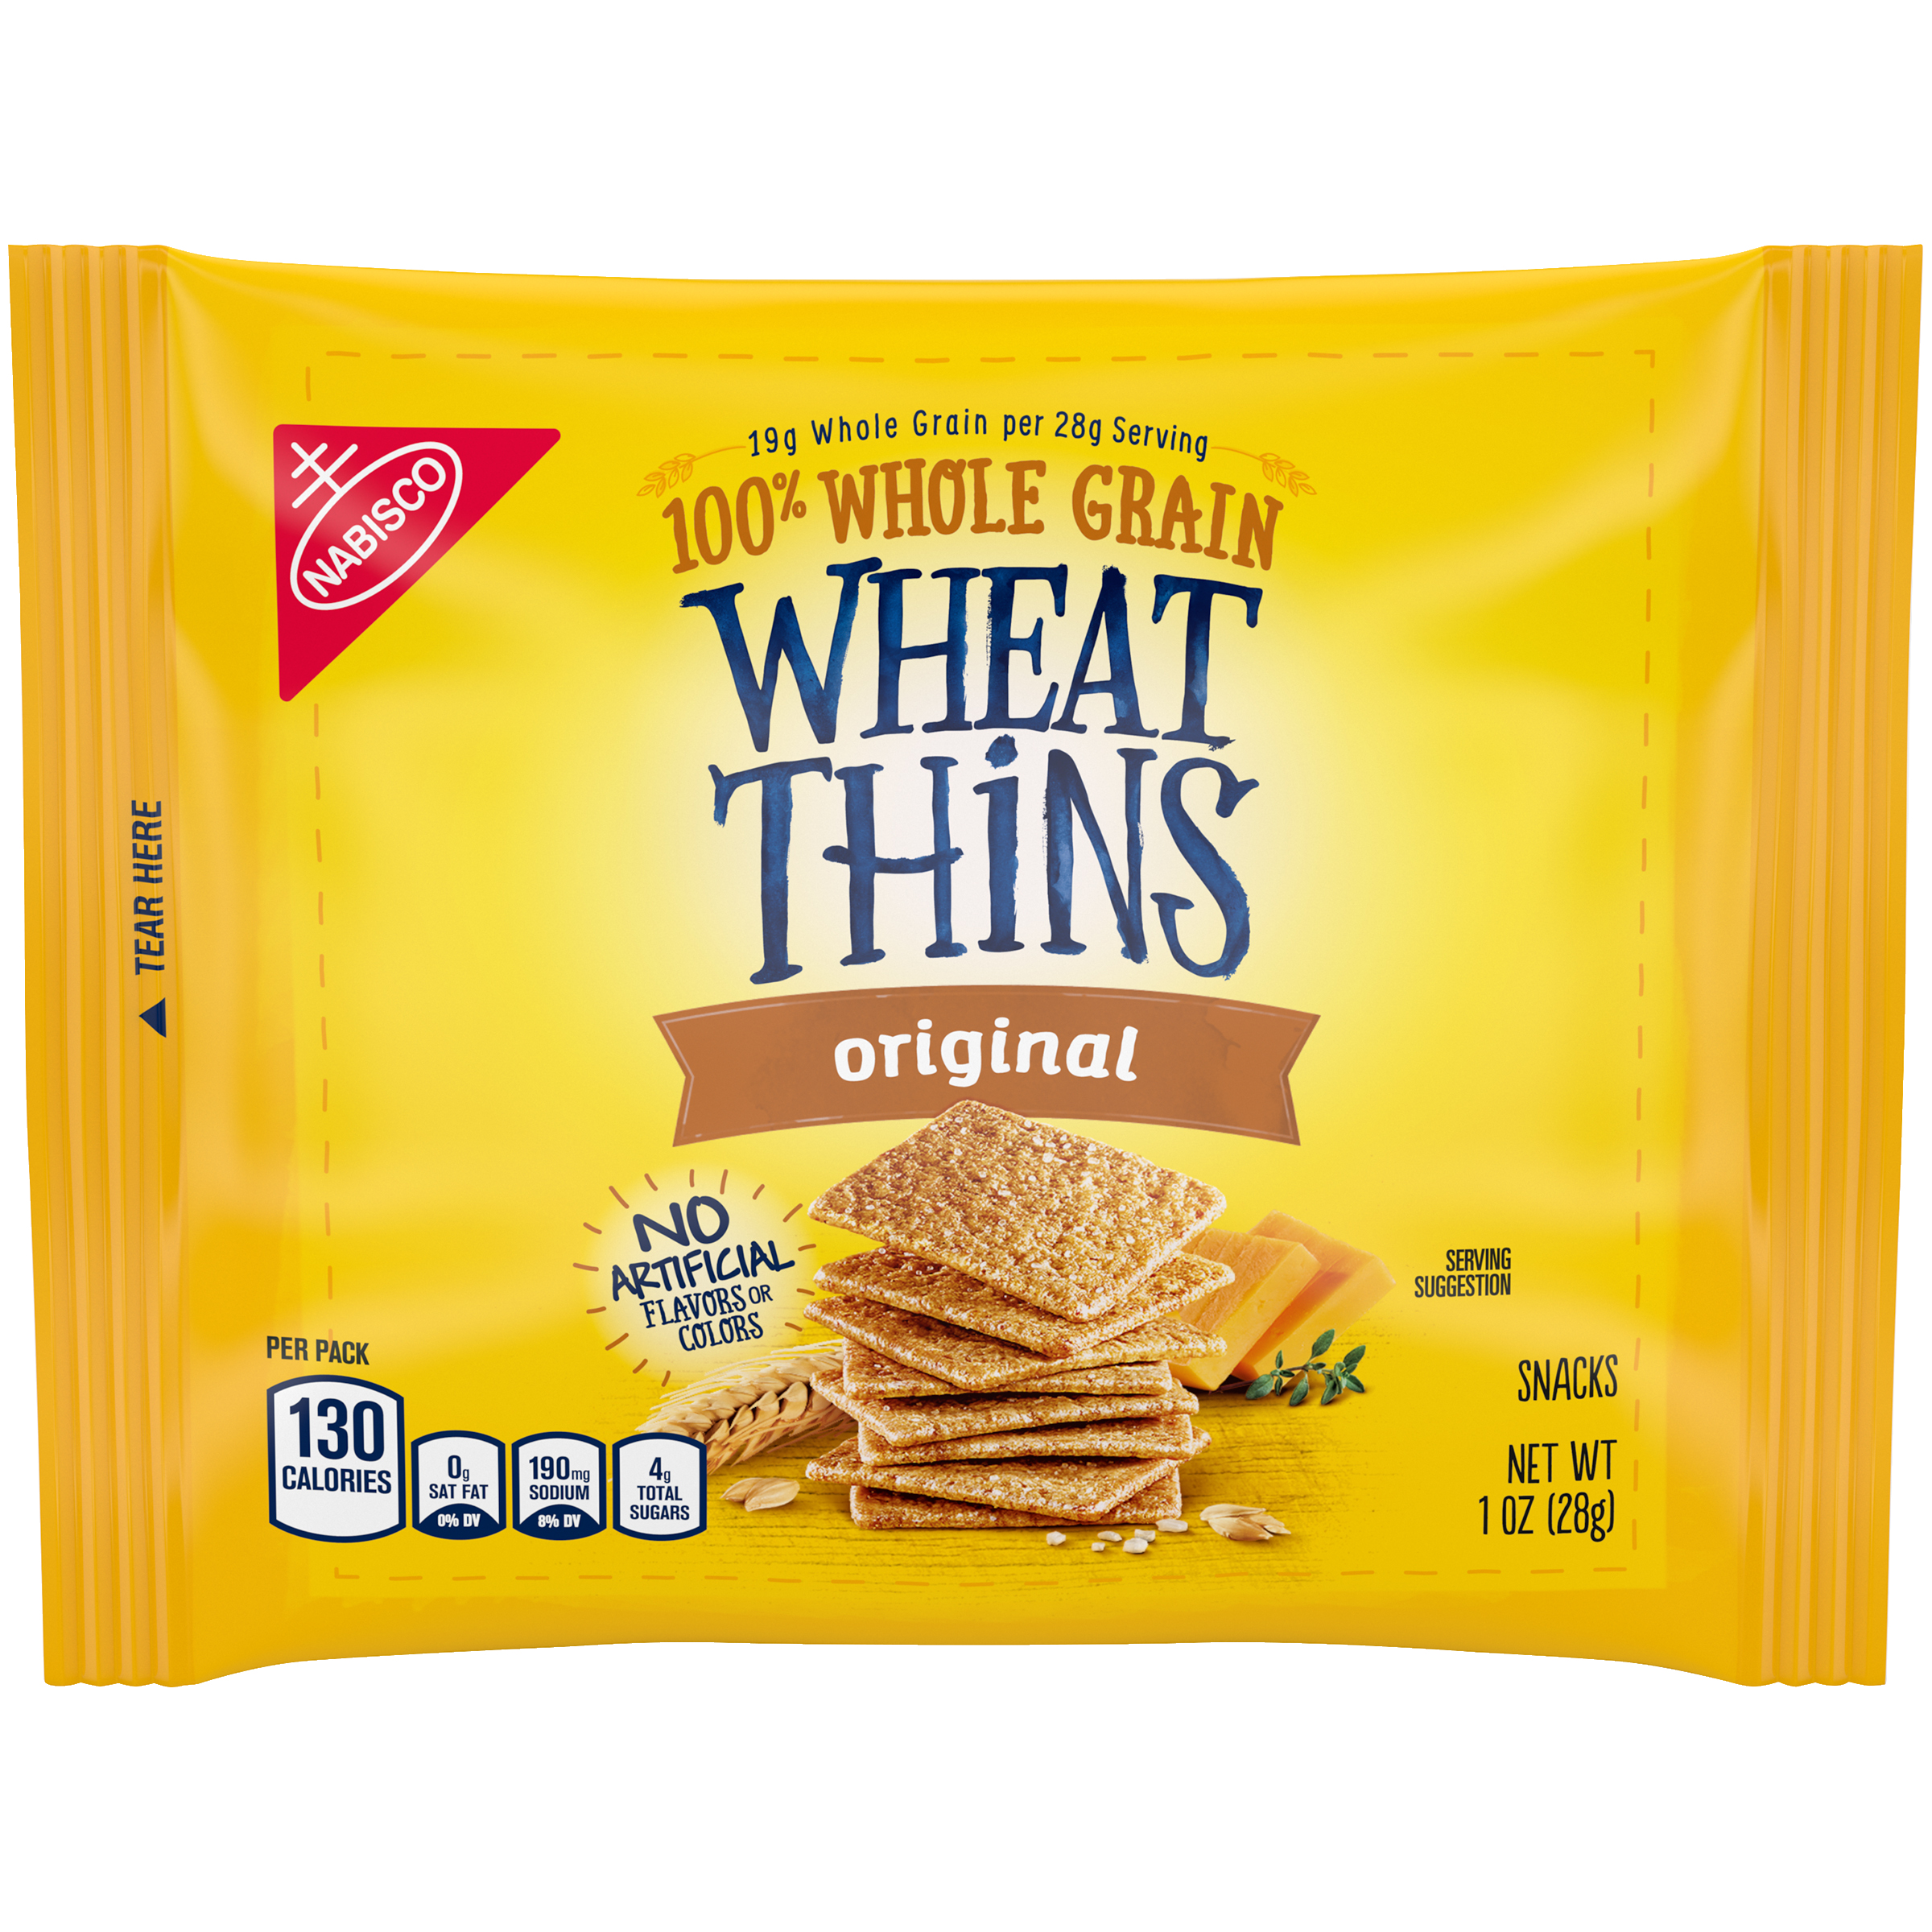 Wheat Thins Original Whole Grain Wheat Crackers, 1 oz Snack Pack